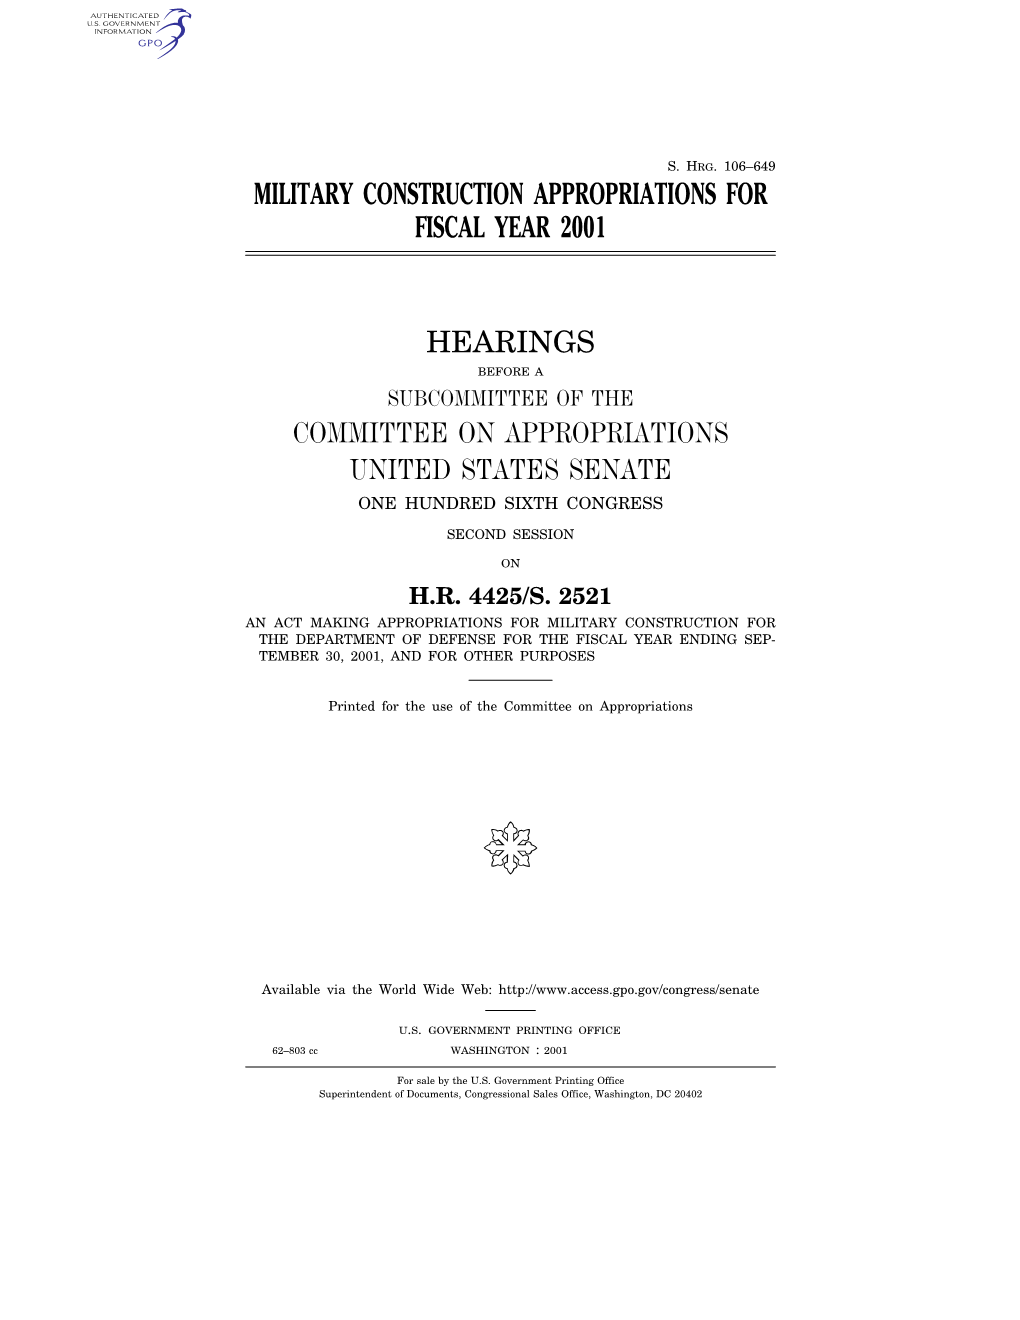 Military Construction Appropriations for Fiscal Year 2001 Hearings Committee on Appropriations United States Senate